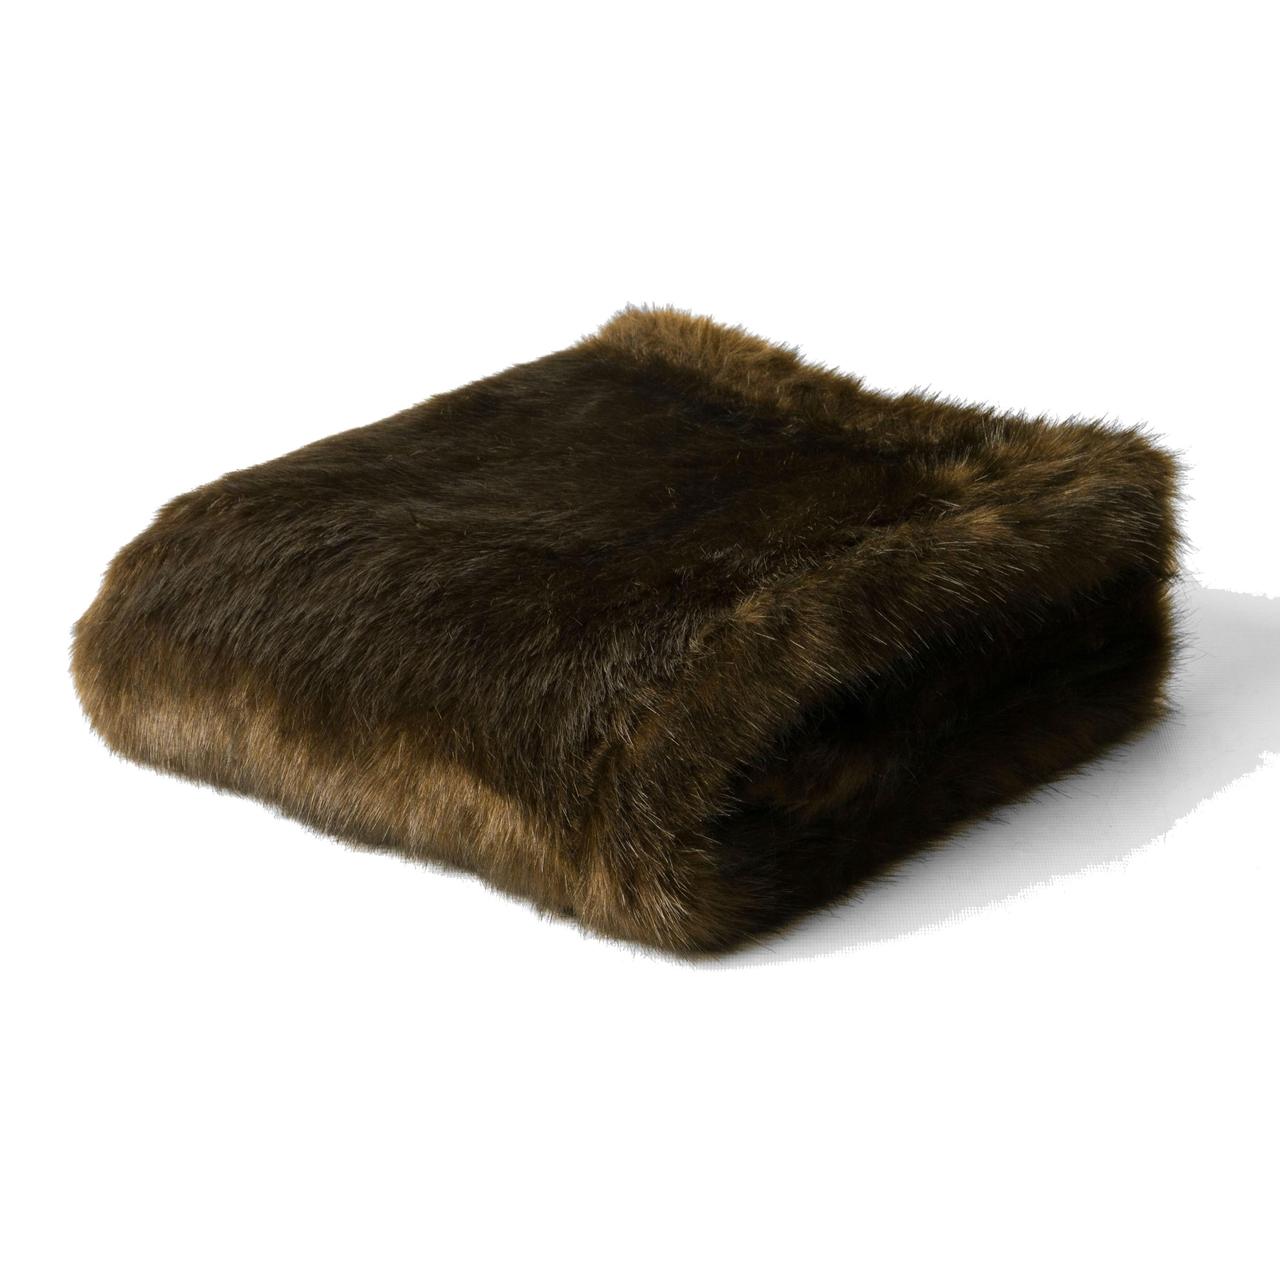 An image of Charley Chau Faux-Fur Blanket Brown Bear, Large